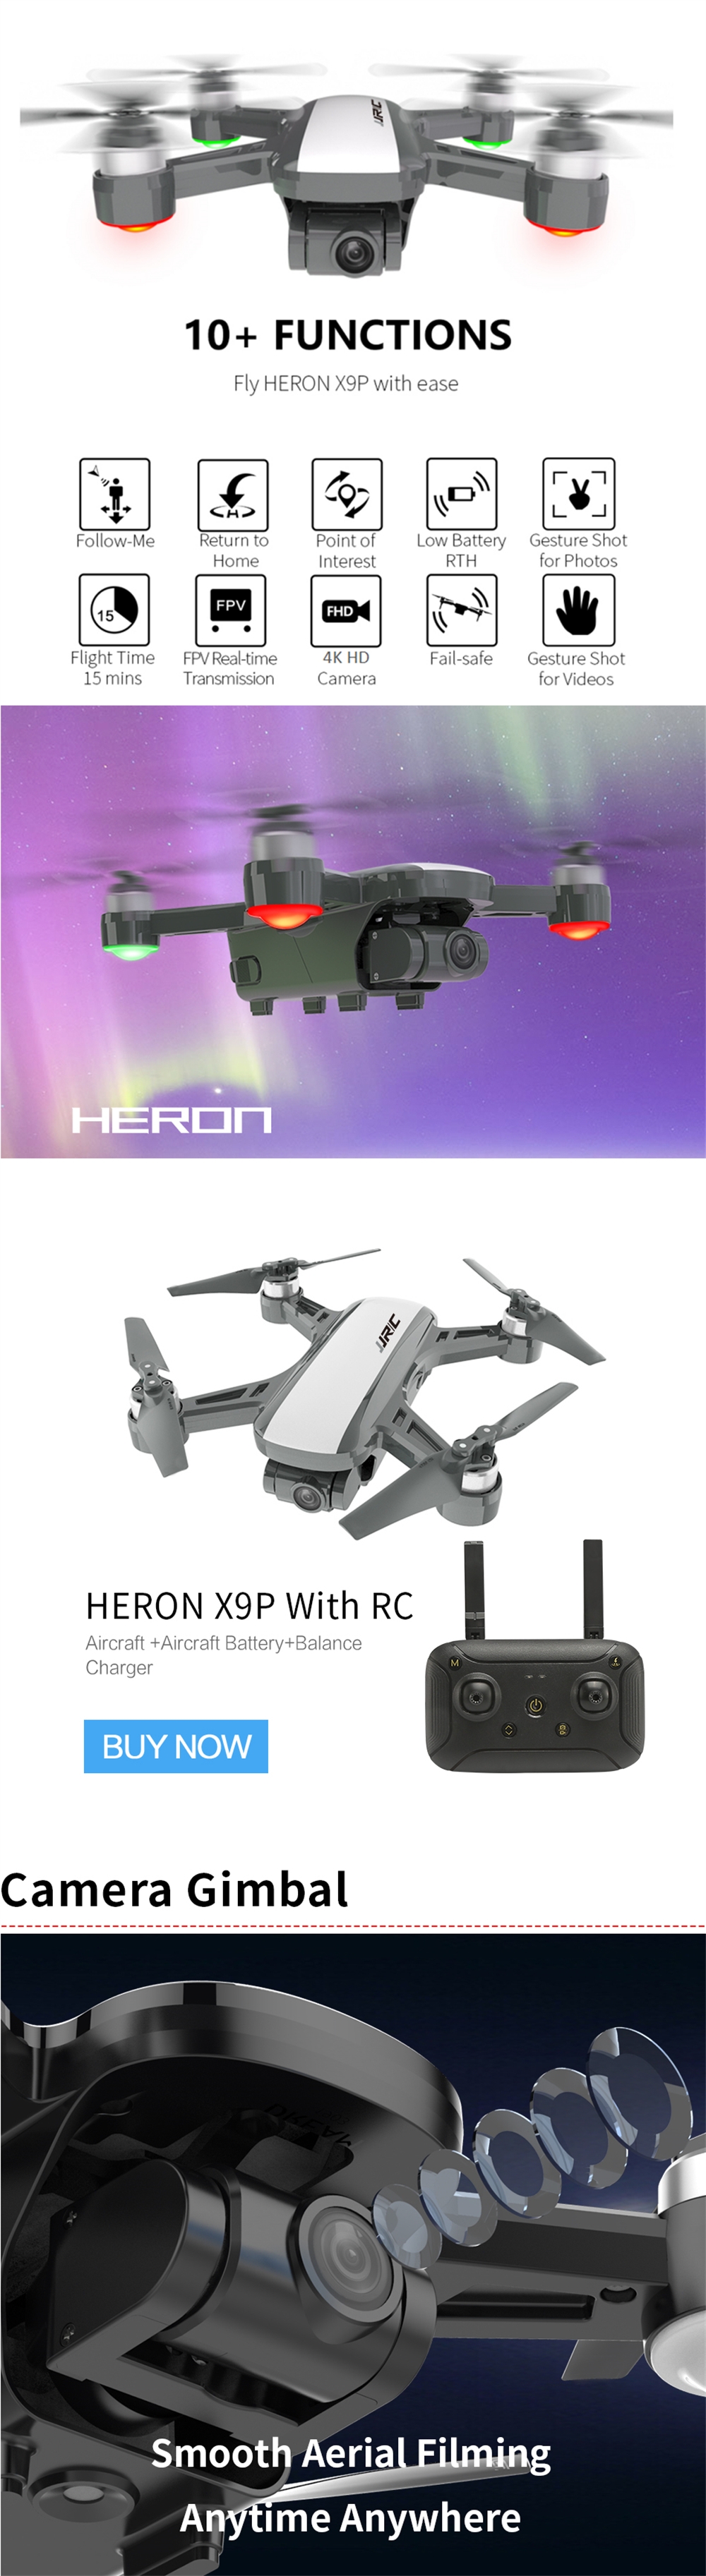 JJRC X9P Heron GPS 5G WiFi FPV With 4K HD Camera Optical Flow Positioning RC Drone Quadcopter RTF